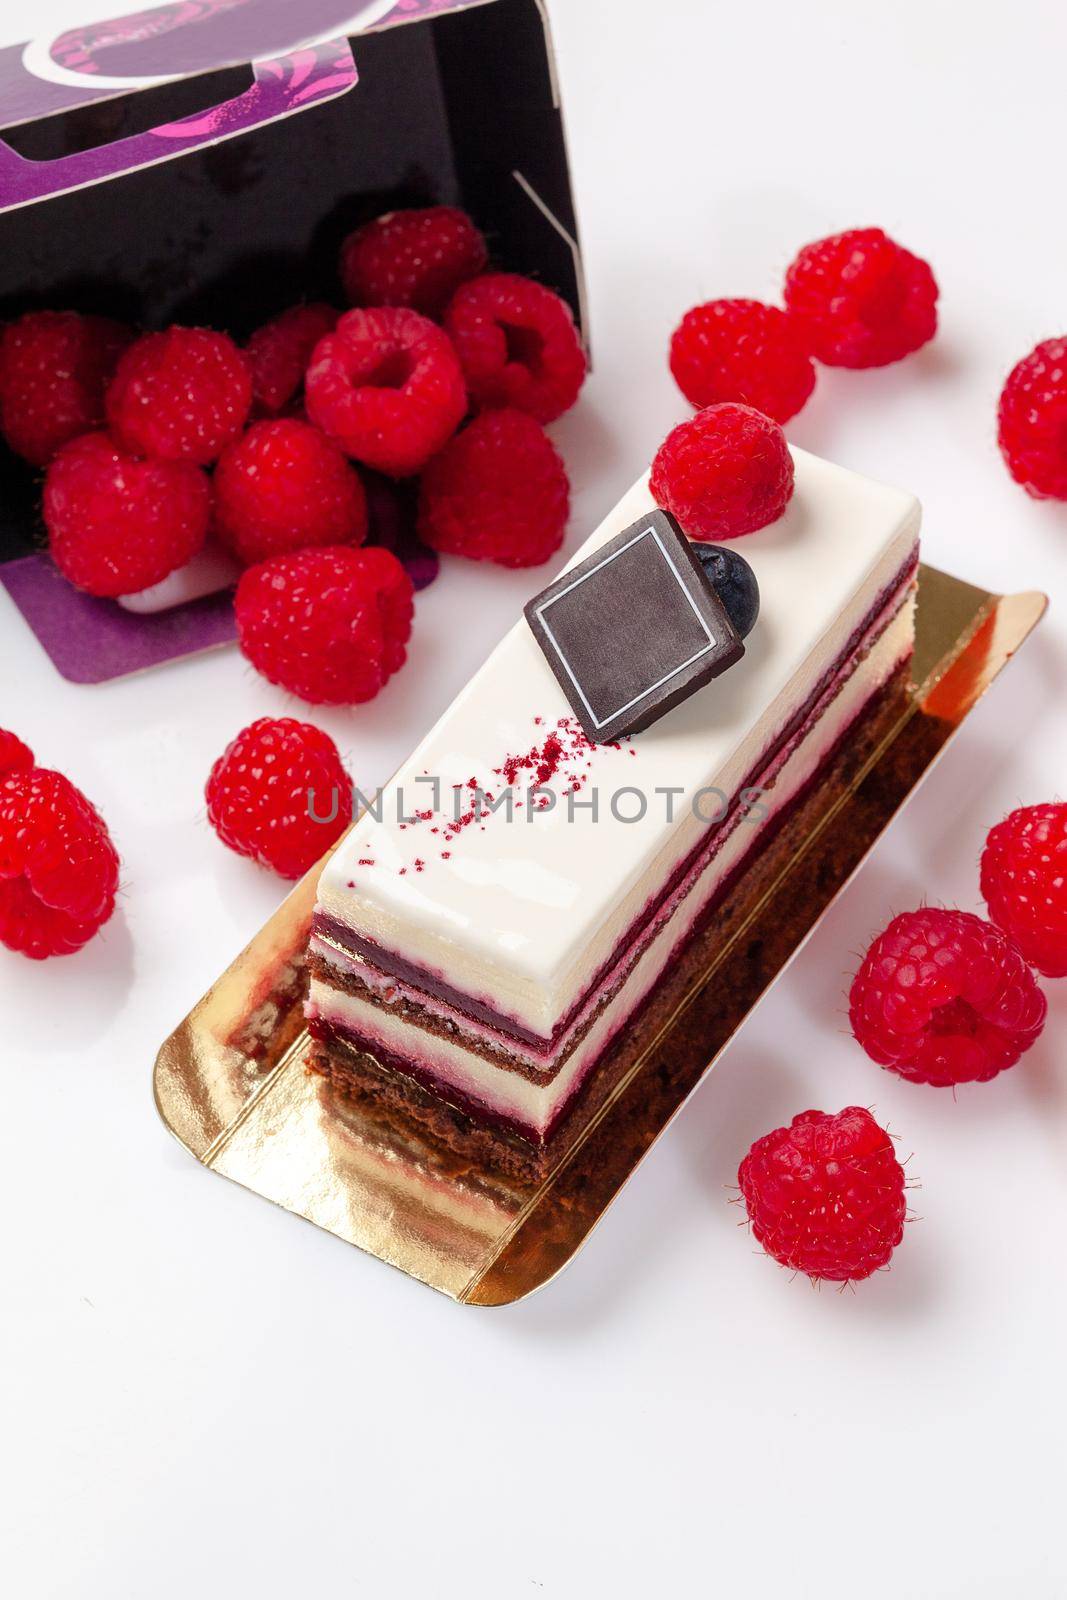 Chocolate sponge cake slice with layers of whipped cheese cream and aromatic raspberry confit garnished with fresh ripe berries on white surface. Delicious sweet pastry